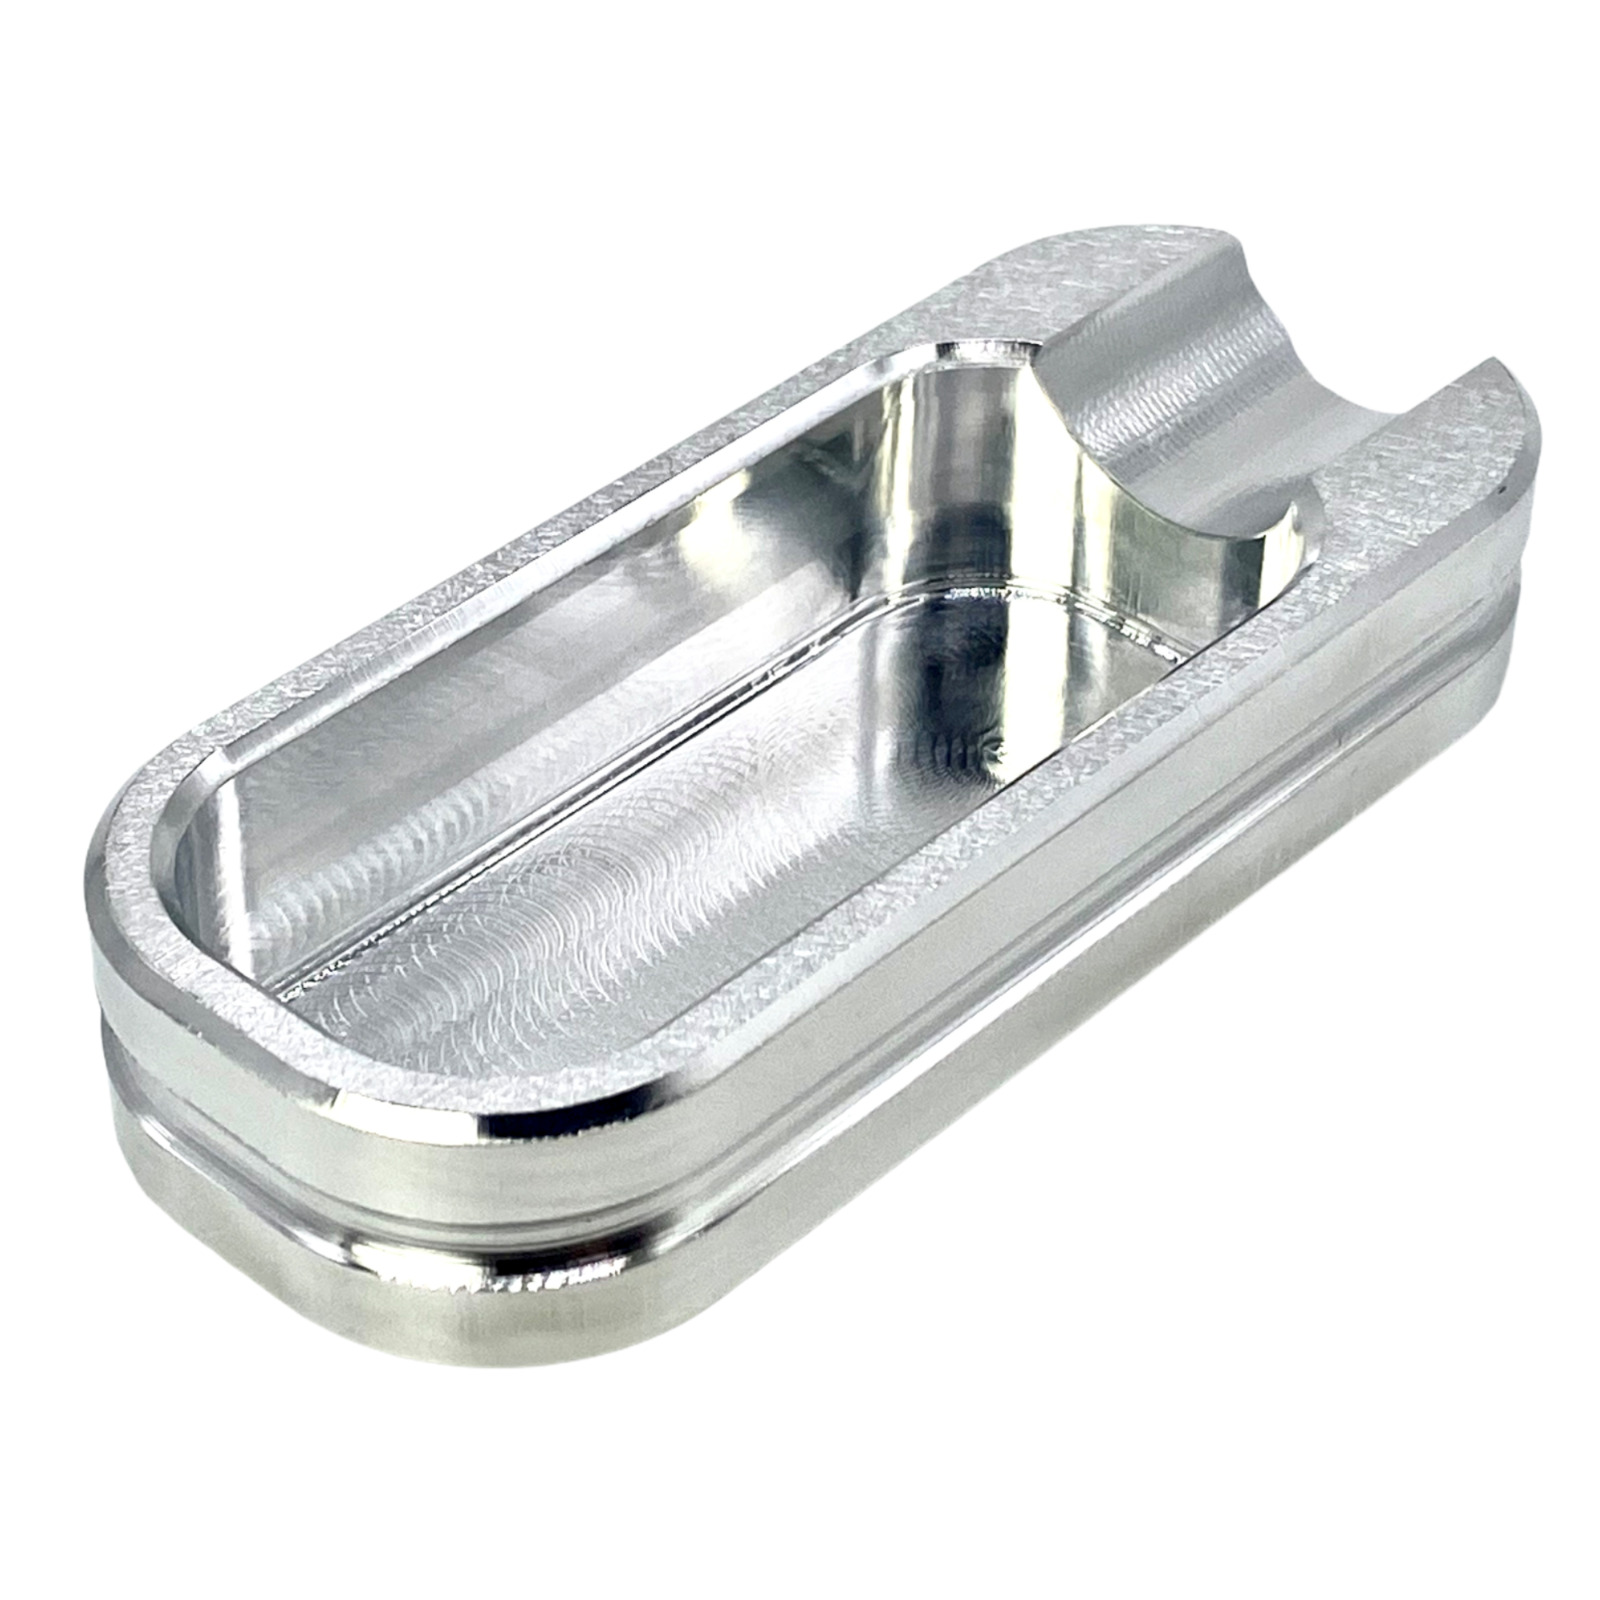 cigar ashtray oval - billet aluminum - outdoor -travel - CNC machined - polished